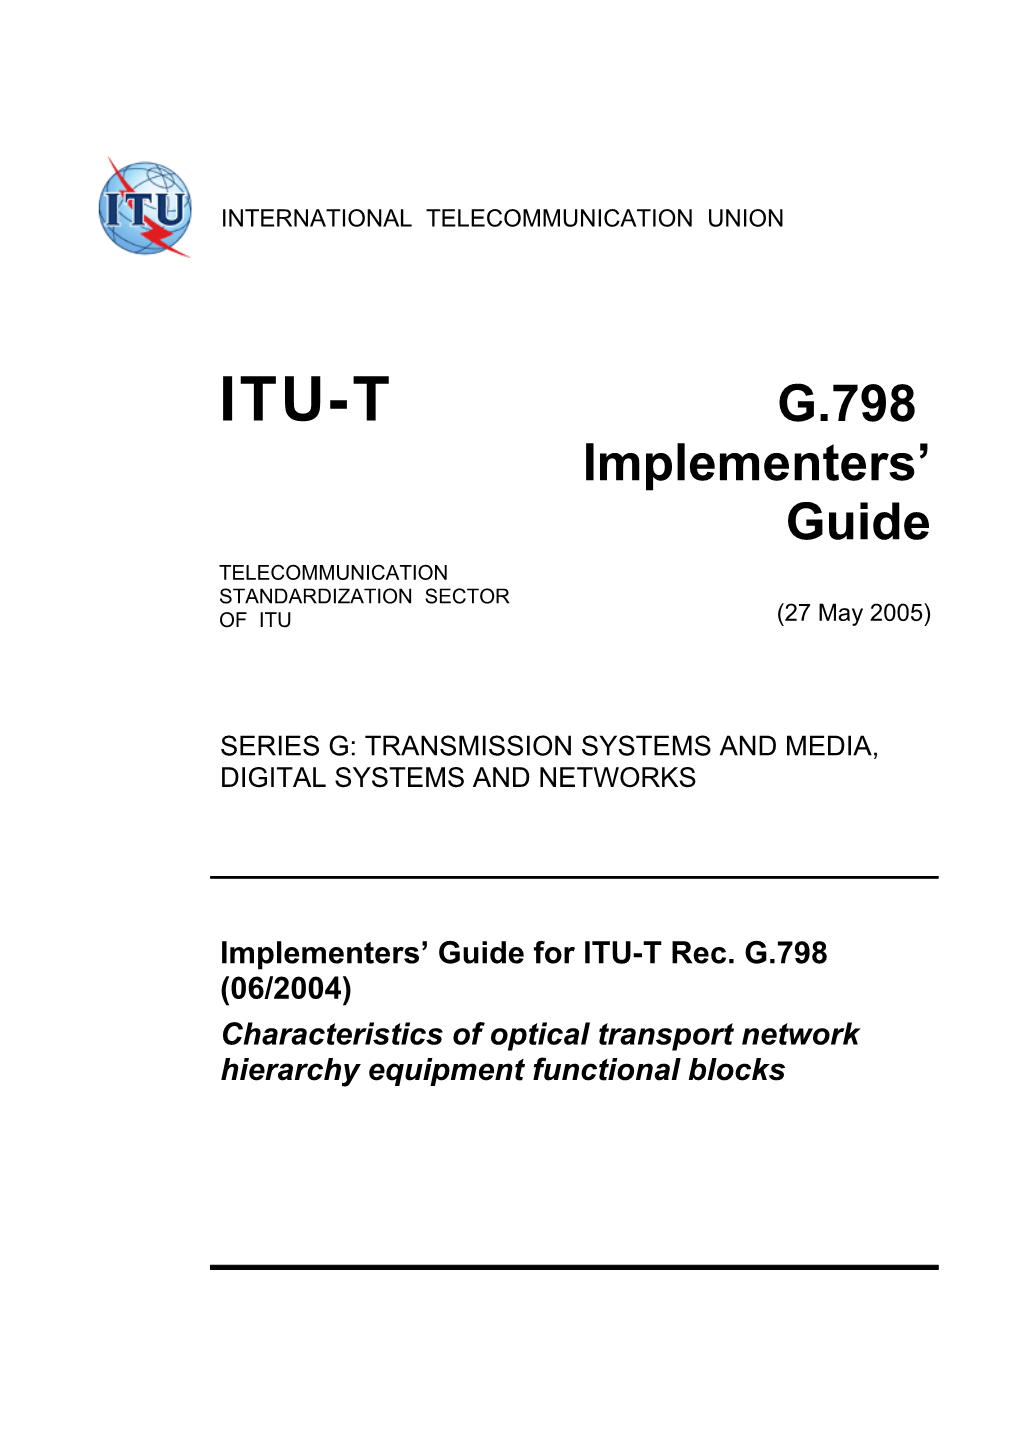 H.323 Series Implementers Guide - January 2004